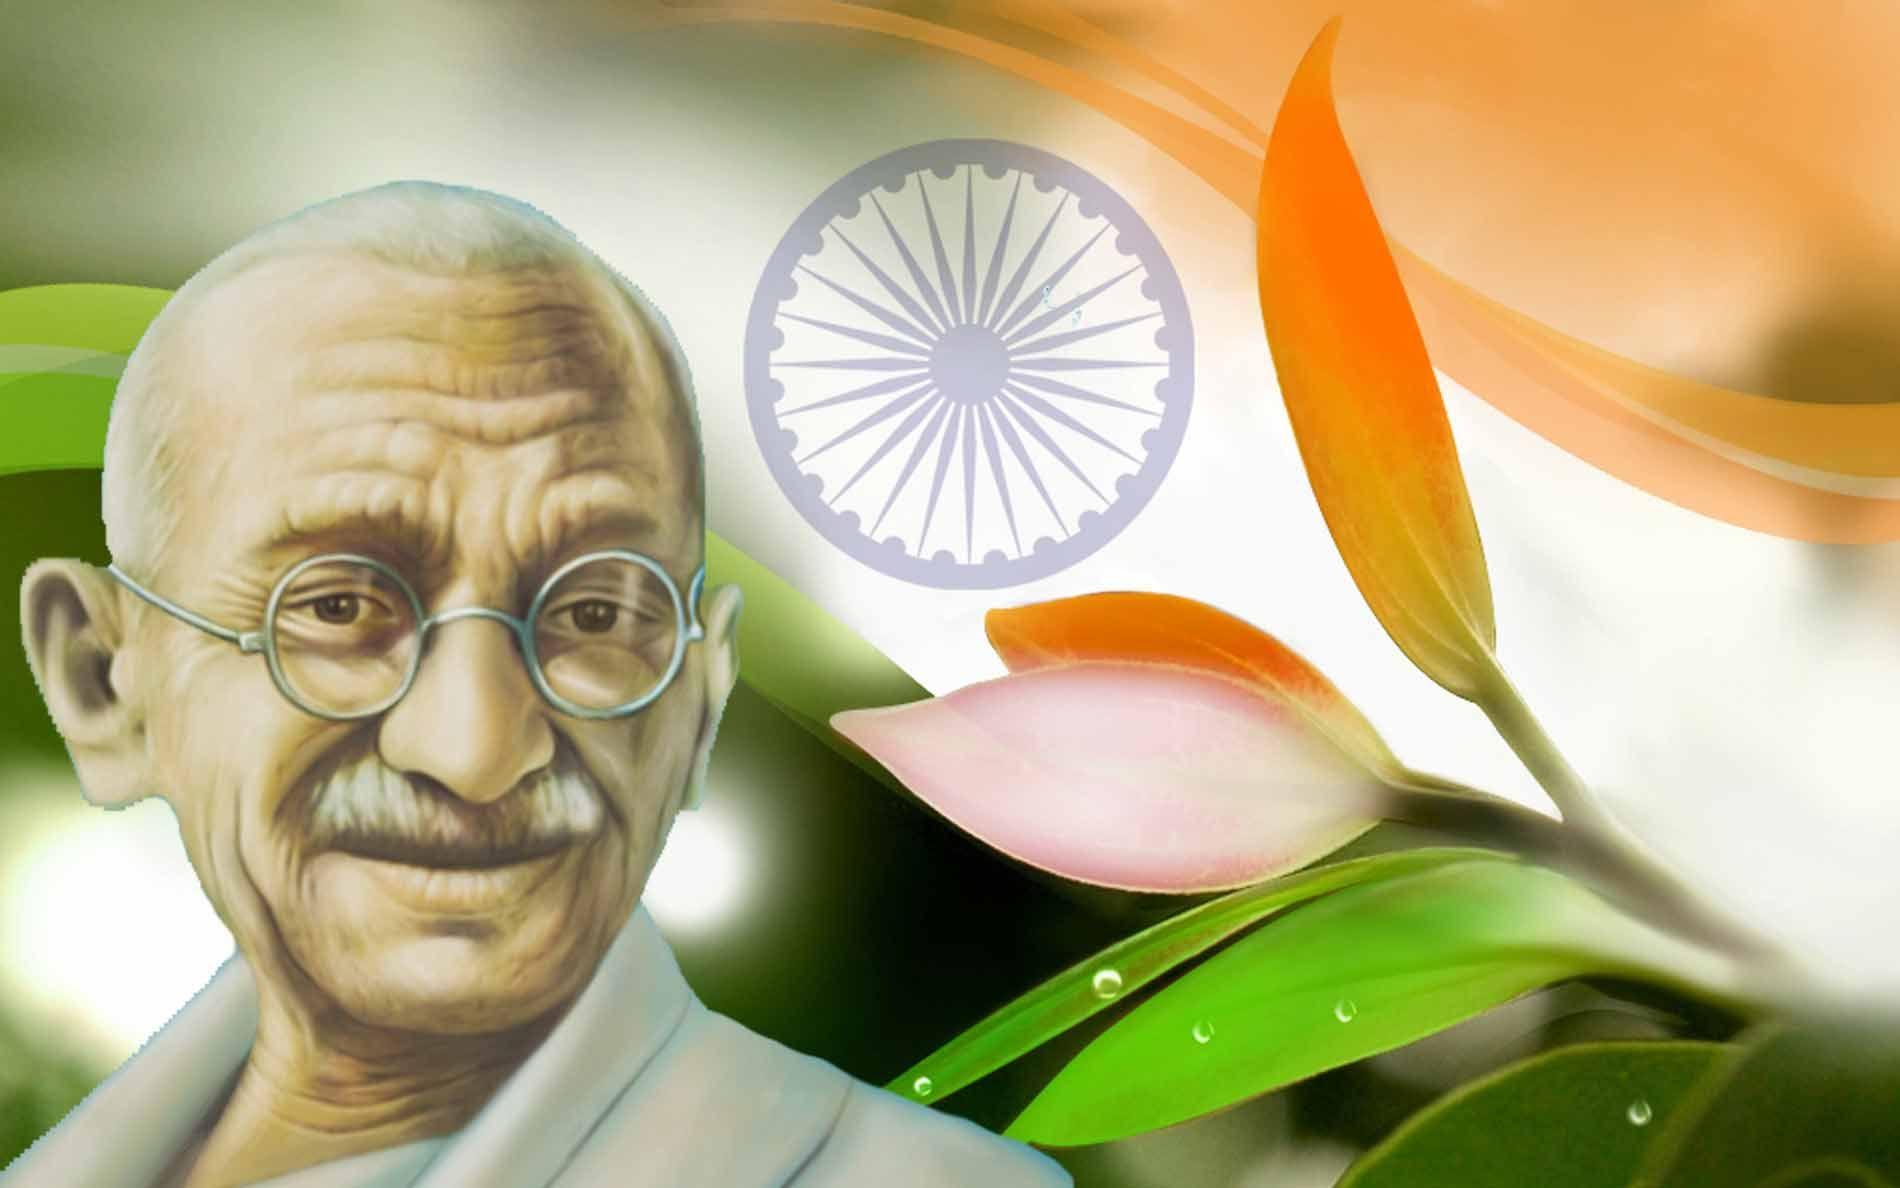 Happy Gandhi Jayanthi Image, Quotes by Father of Nation [Mohandas